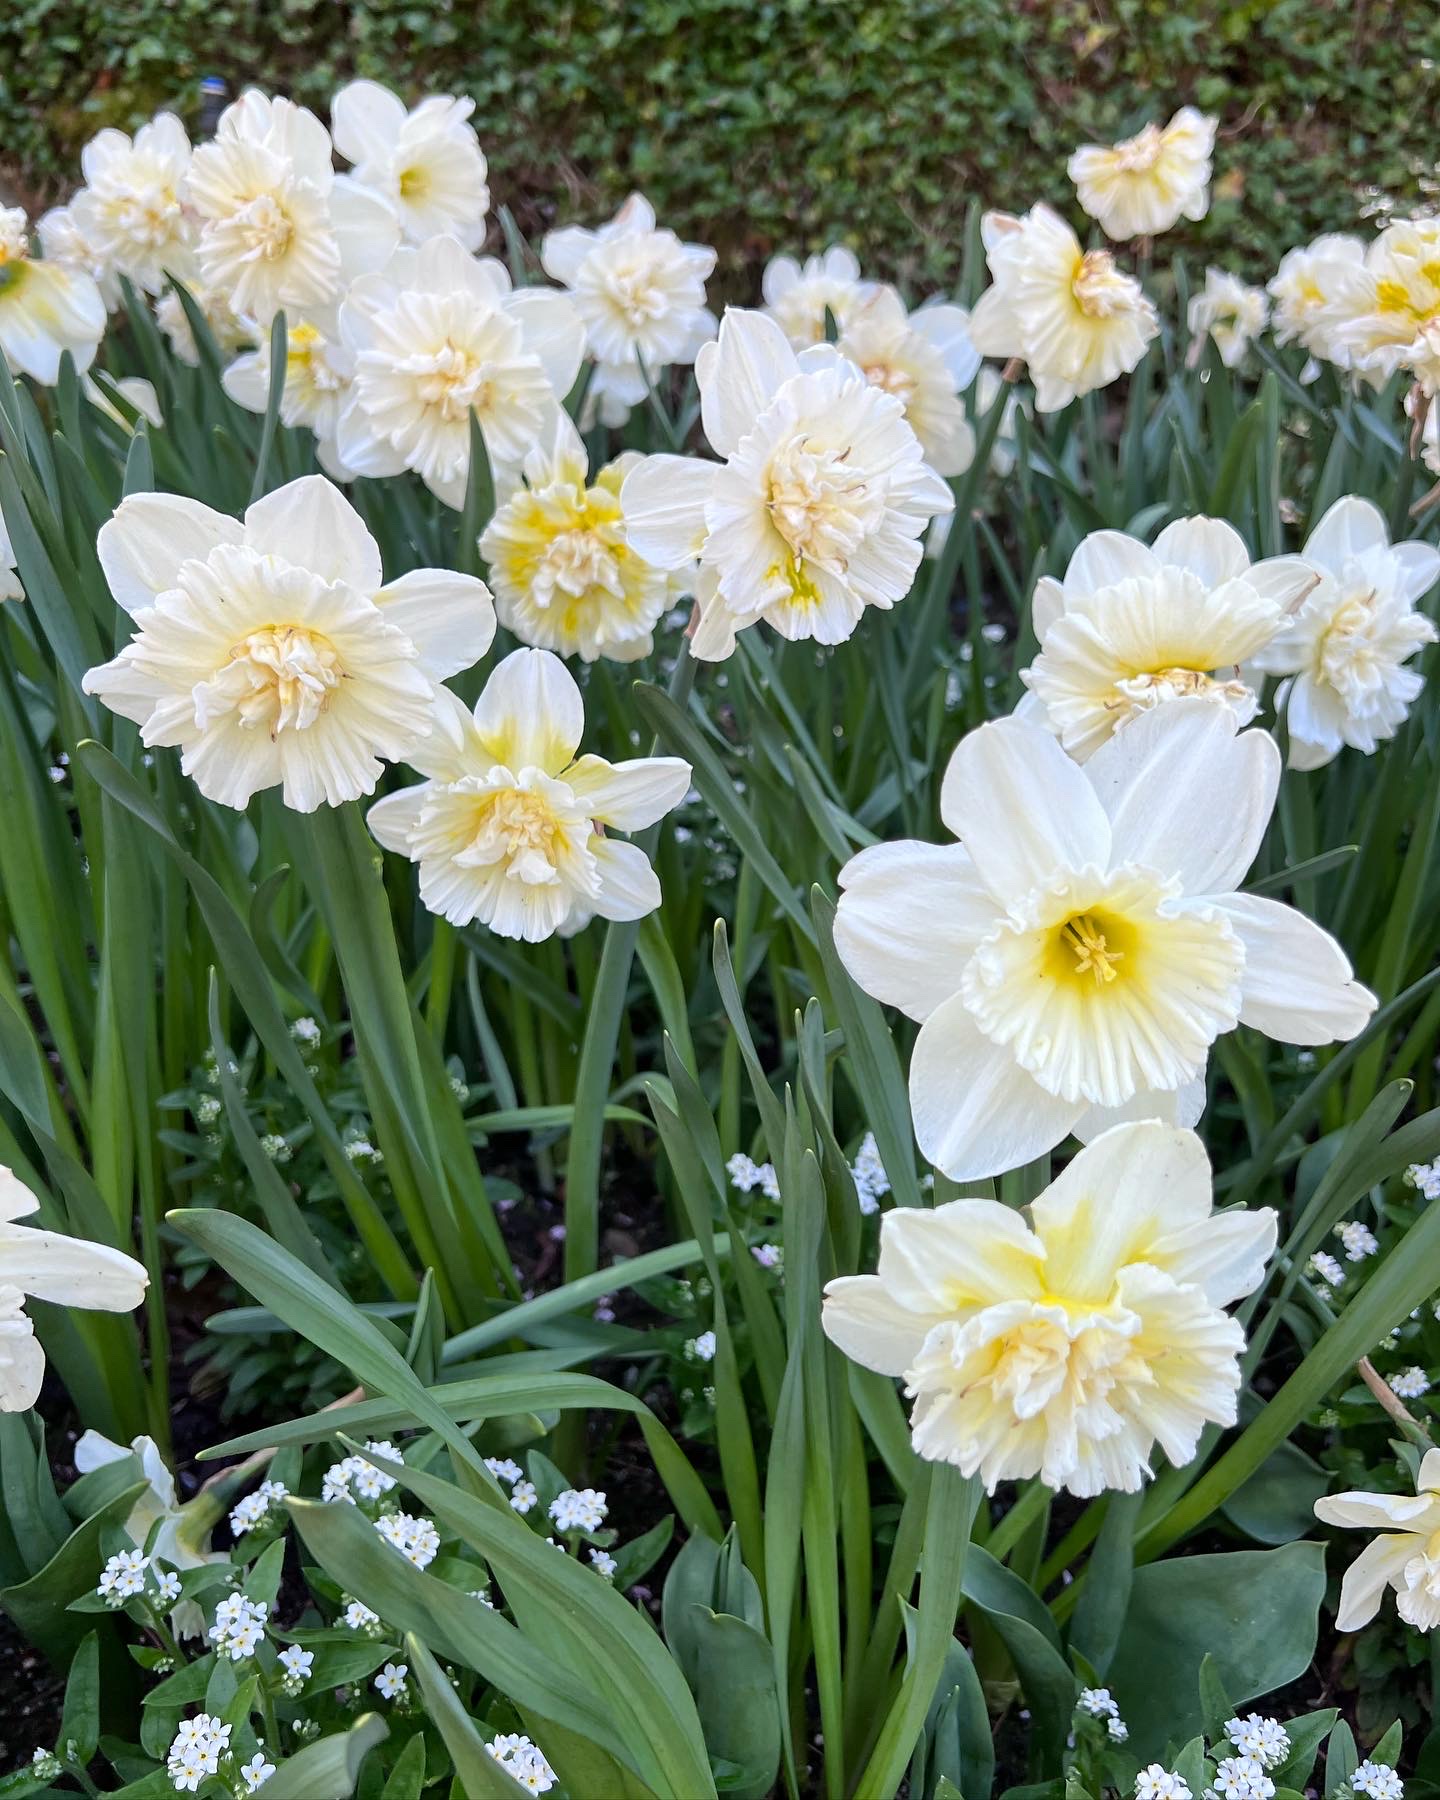 close up white daffodils with yellow centers